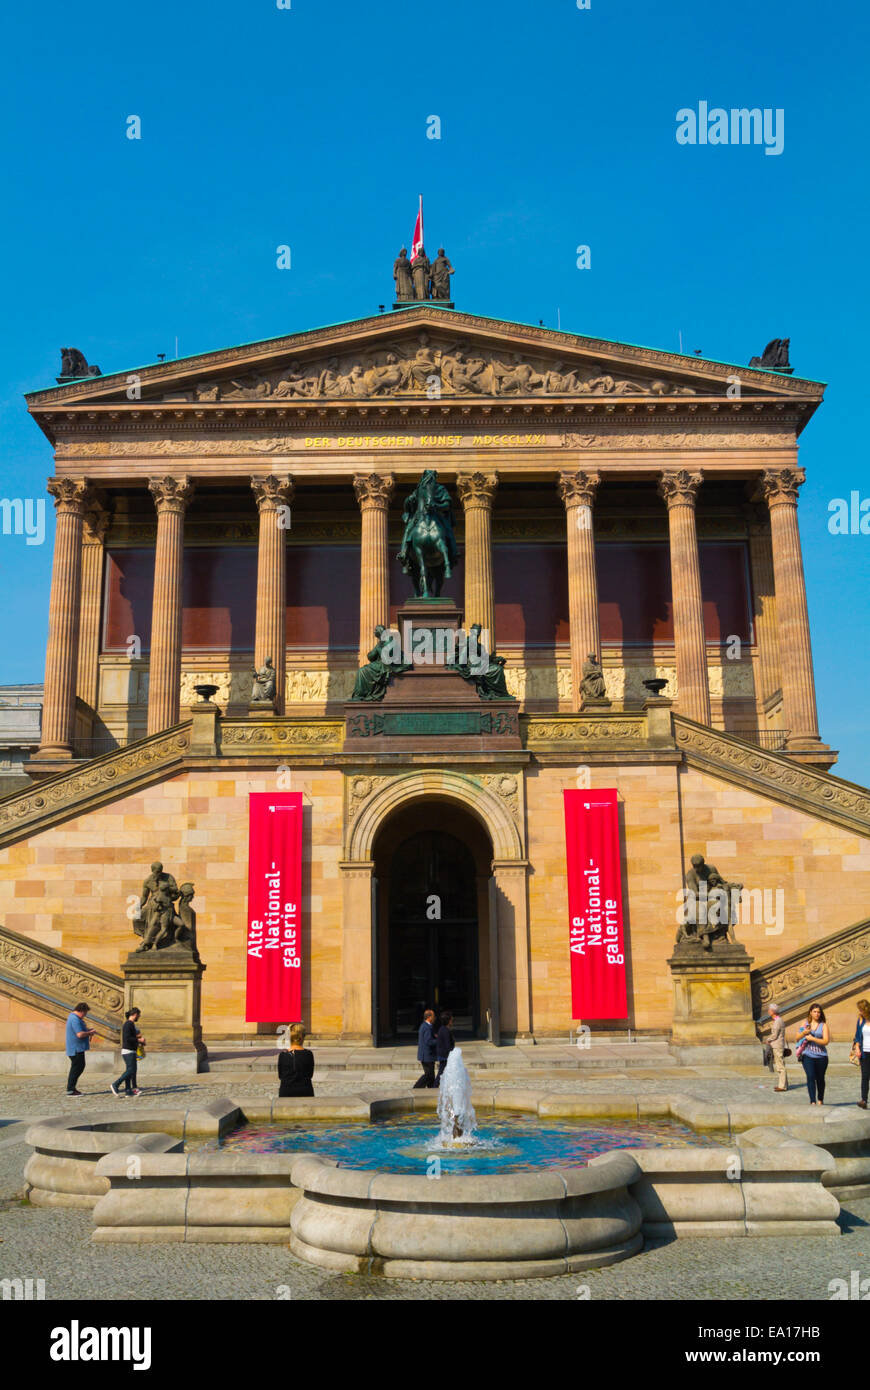 Alte Nationalgalerie, National Art Gallery, Museumsinsel, the museum island, Mitte district, central Berlin, Germany Stock Photo